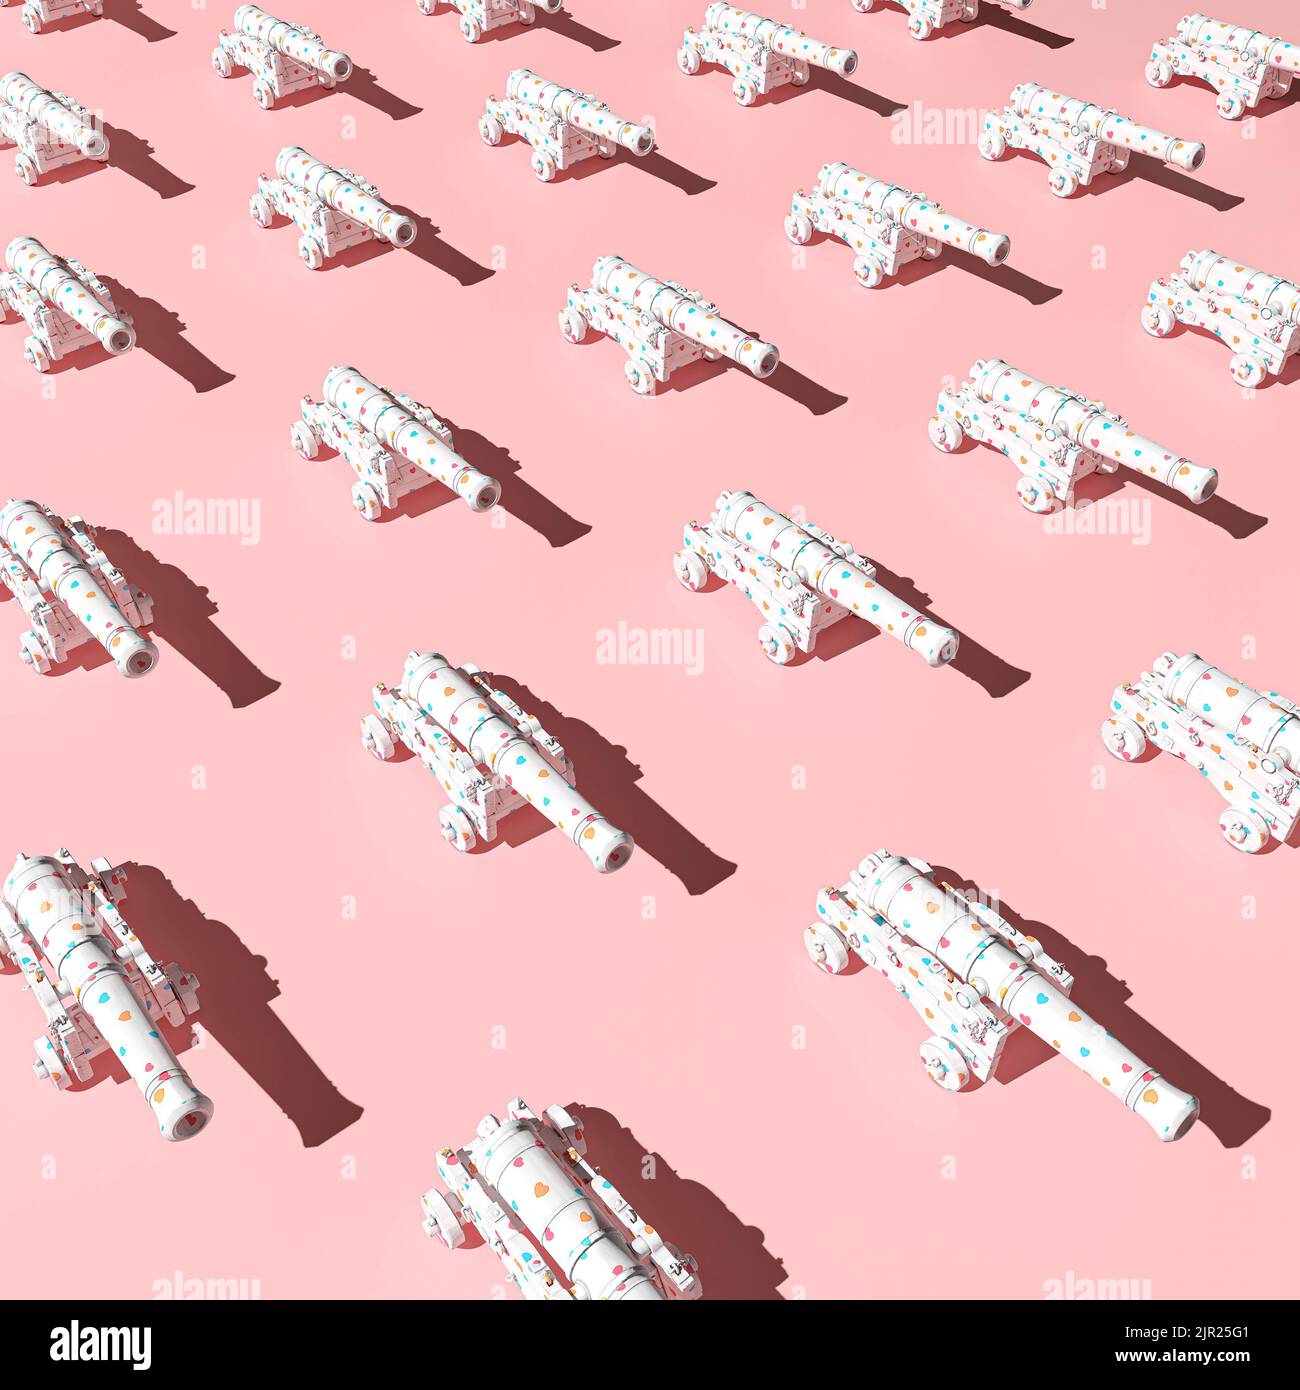 3D Illustration pattern concept of a cannon of love that shoots hearts instead of bombs.  Love wins in the end. Pastel pink background. Stock Photo